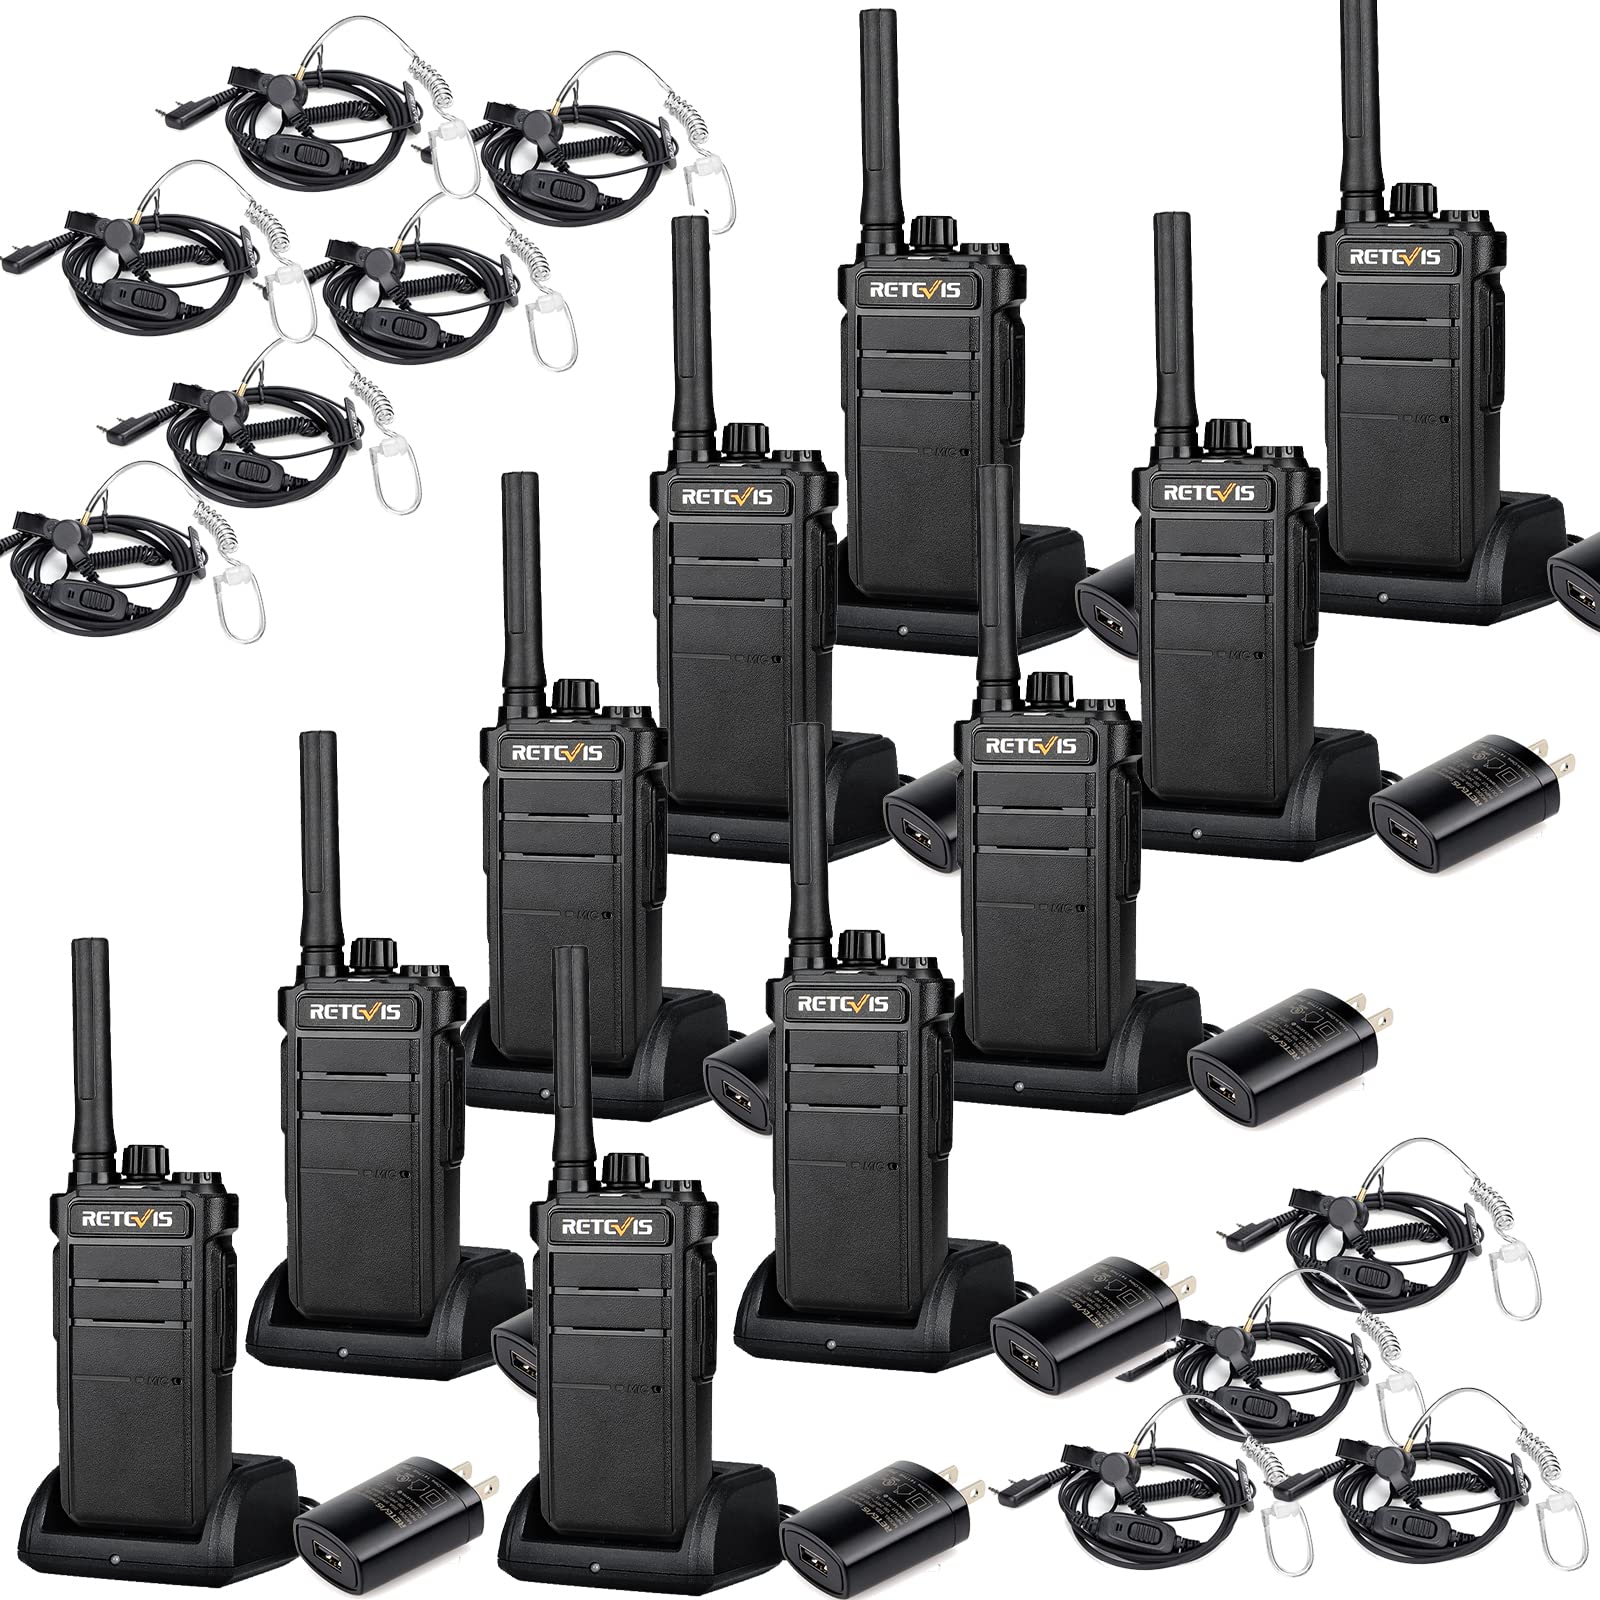 Retevis RB26 3 Watt 2 Way Radio Long Range, GMRS Walkie Talkies with Earpiece and Mic Set, Two Way Radios Long Range Rechargeable, for School Security Construction Work(10 Pack)